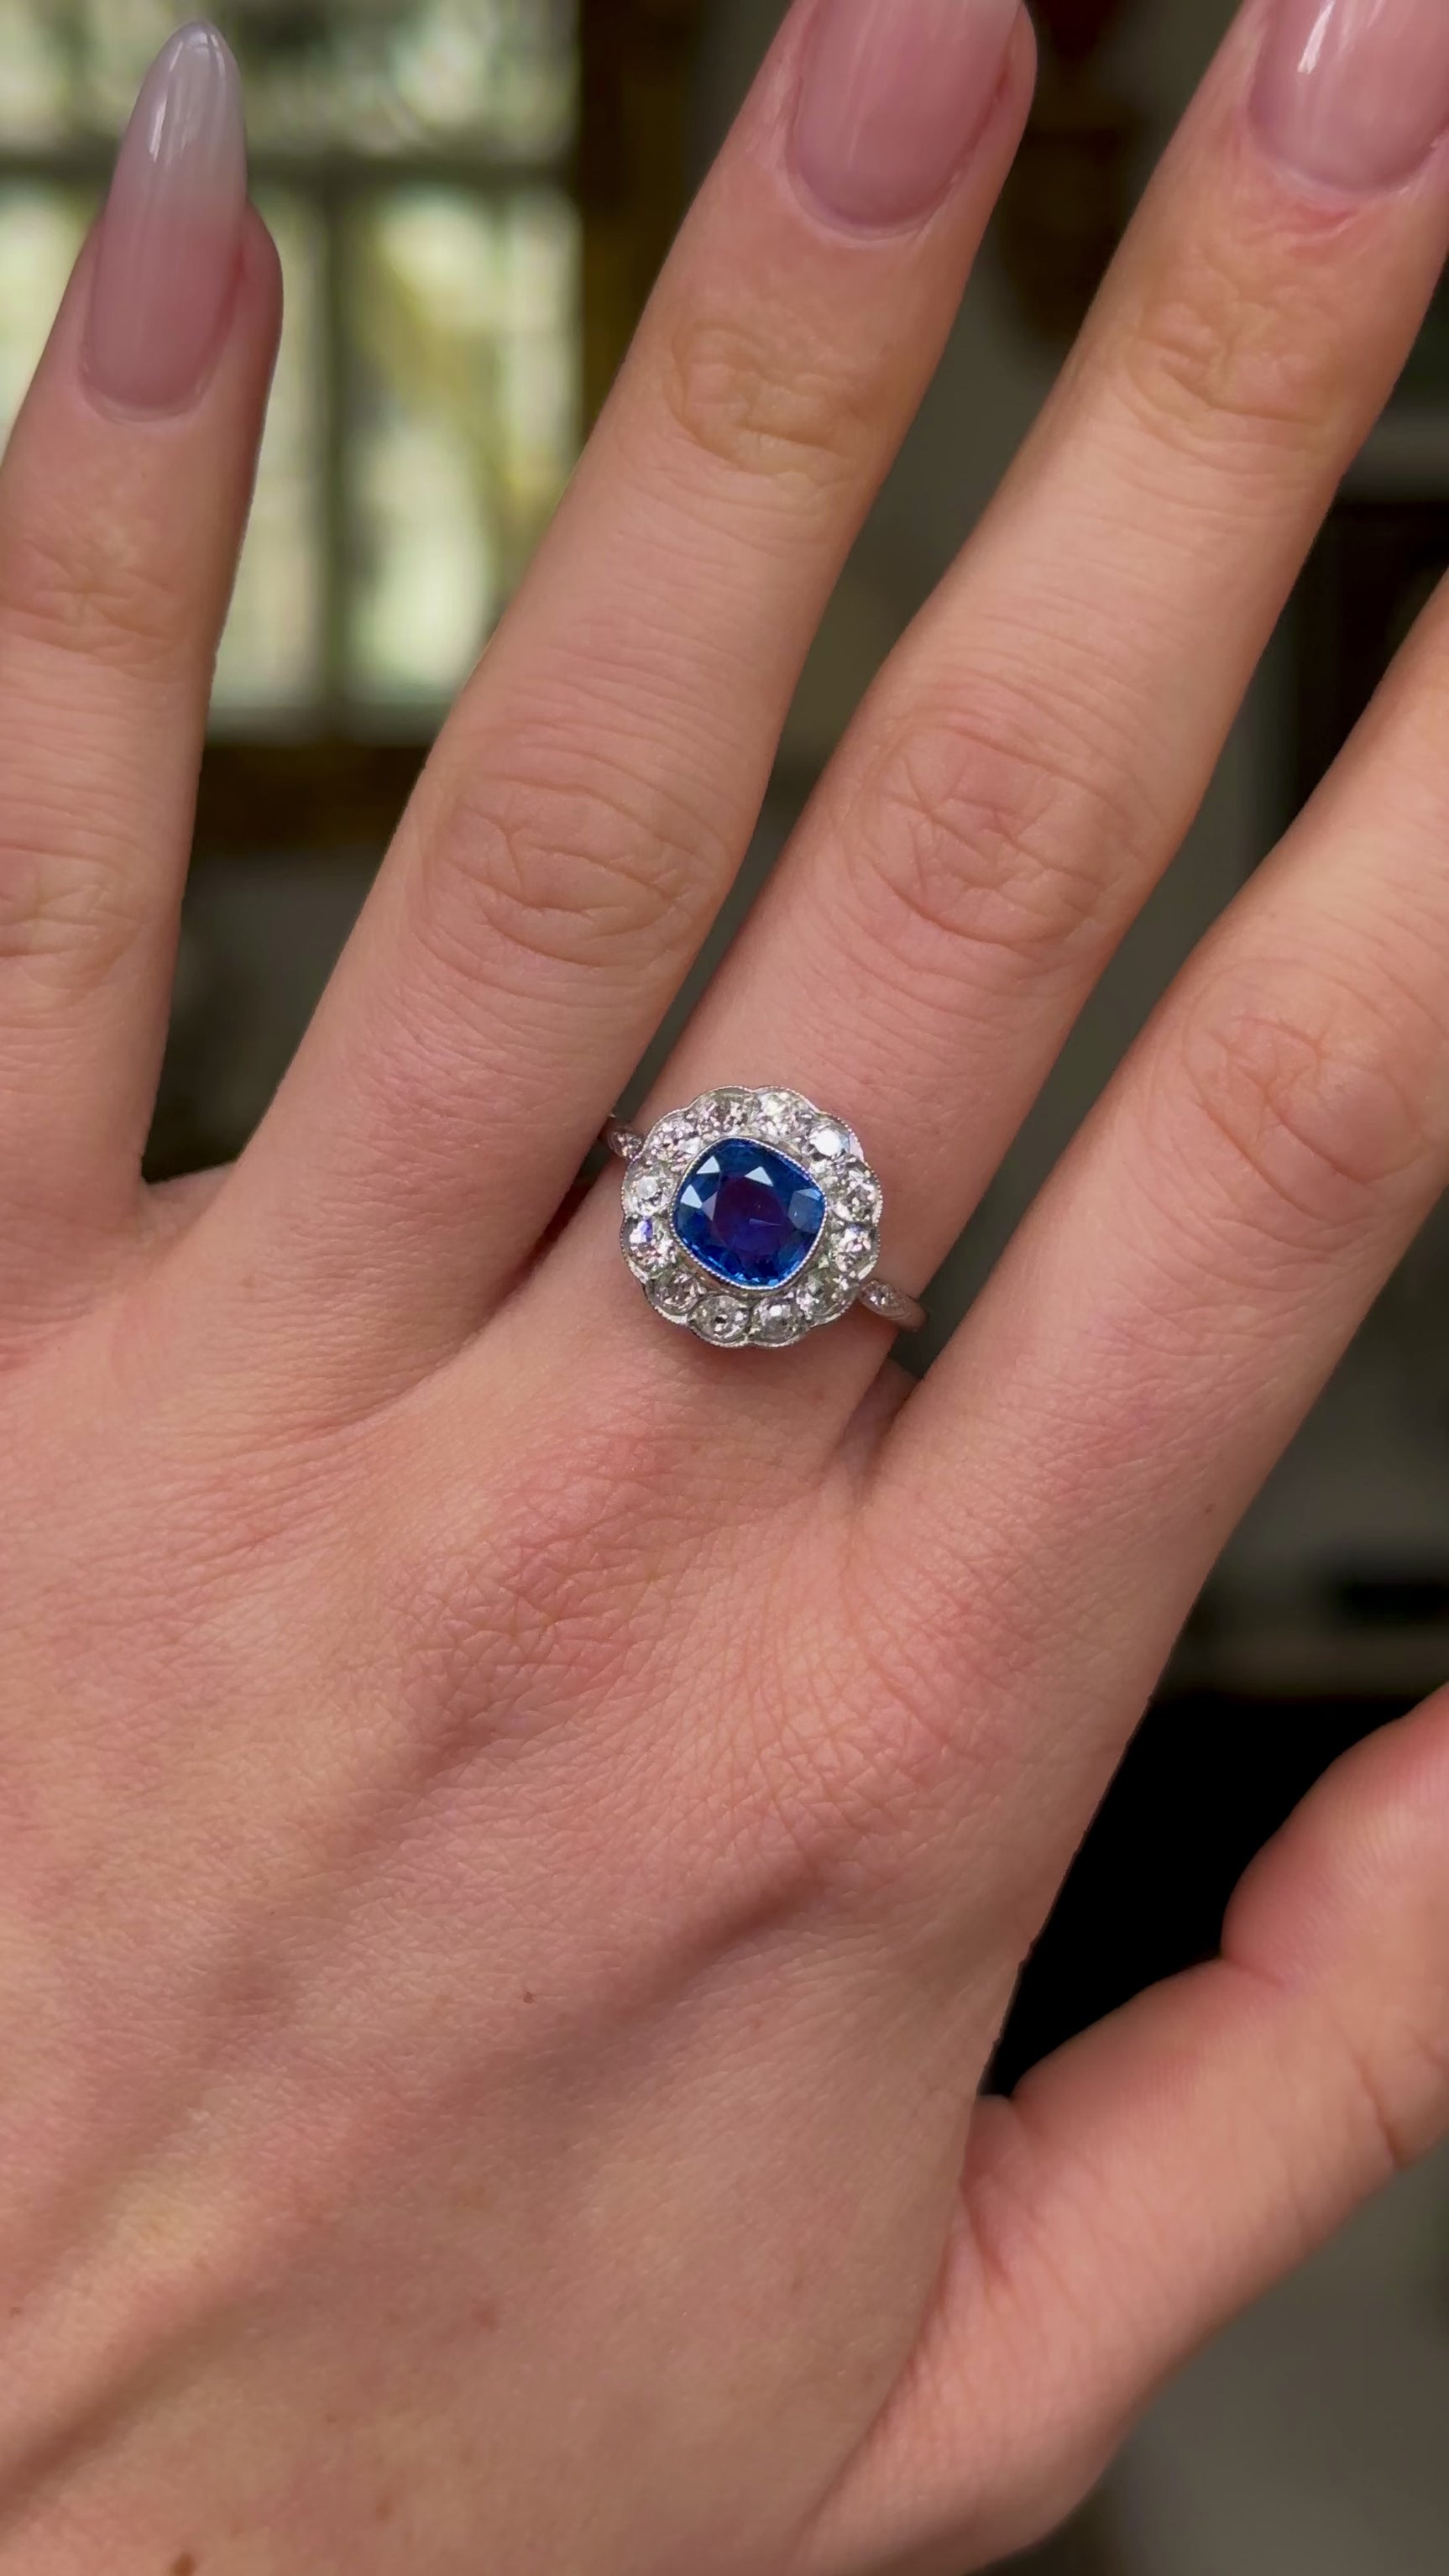 Vintage, 1940s Ceylon Cushion-Cut Sapphire and Diamond Cluster Engagement Ring, worn on hand and rotated to give perspective.